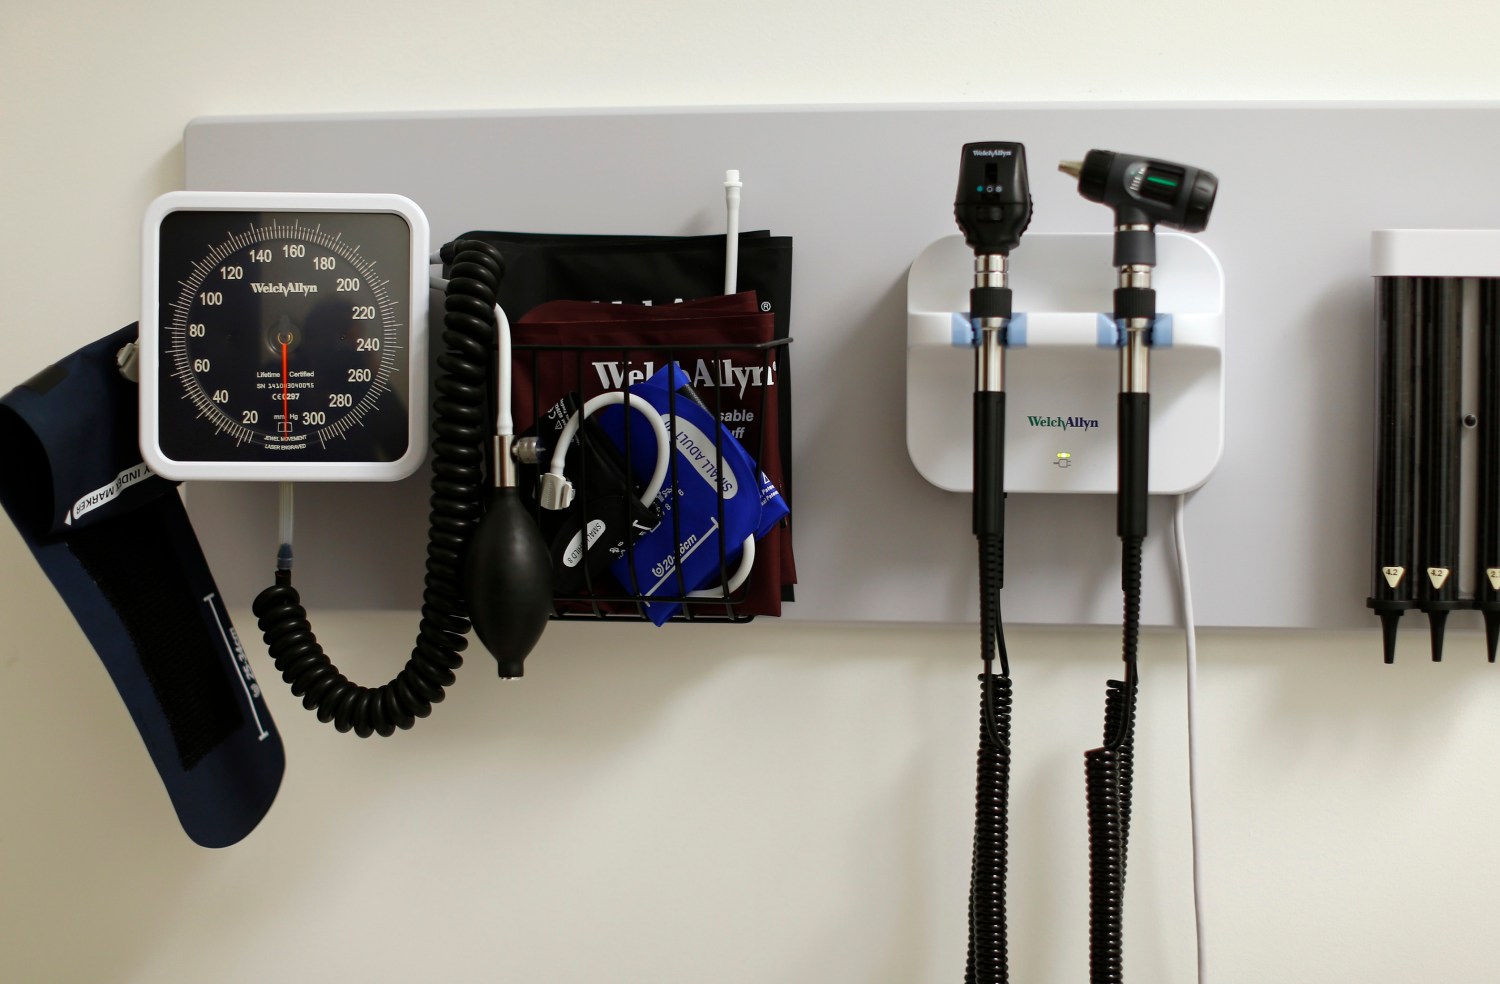 Medical equipment is pictured on the wall of an examination room inside a Kaiser Permanente health clinic located inside a Target retail department store in San Diego, California November 17, 2014. Four clinics are scheduled to open to provide pediatric and adolescent care, well-woman care, family planning, and management of chronic conditions like diabetes and high blood pressure for Kaiser members and non-members.     REUTERS/Mike Blake (UNITED STATES - Tags: HEALTH BUSINESS SOCIETY) - GM1EABI0DLA01